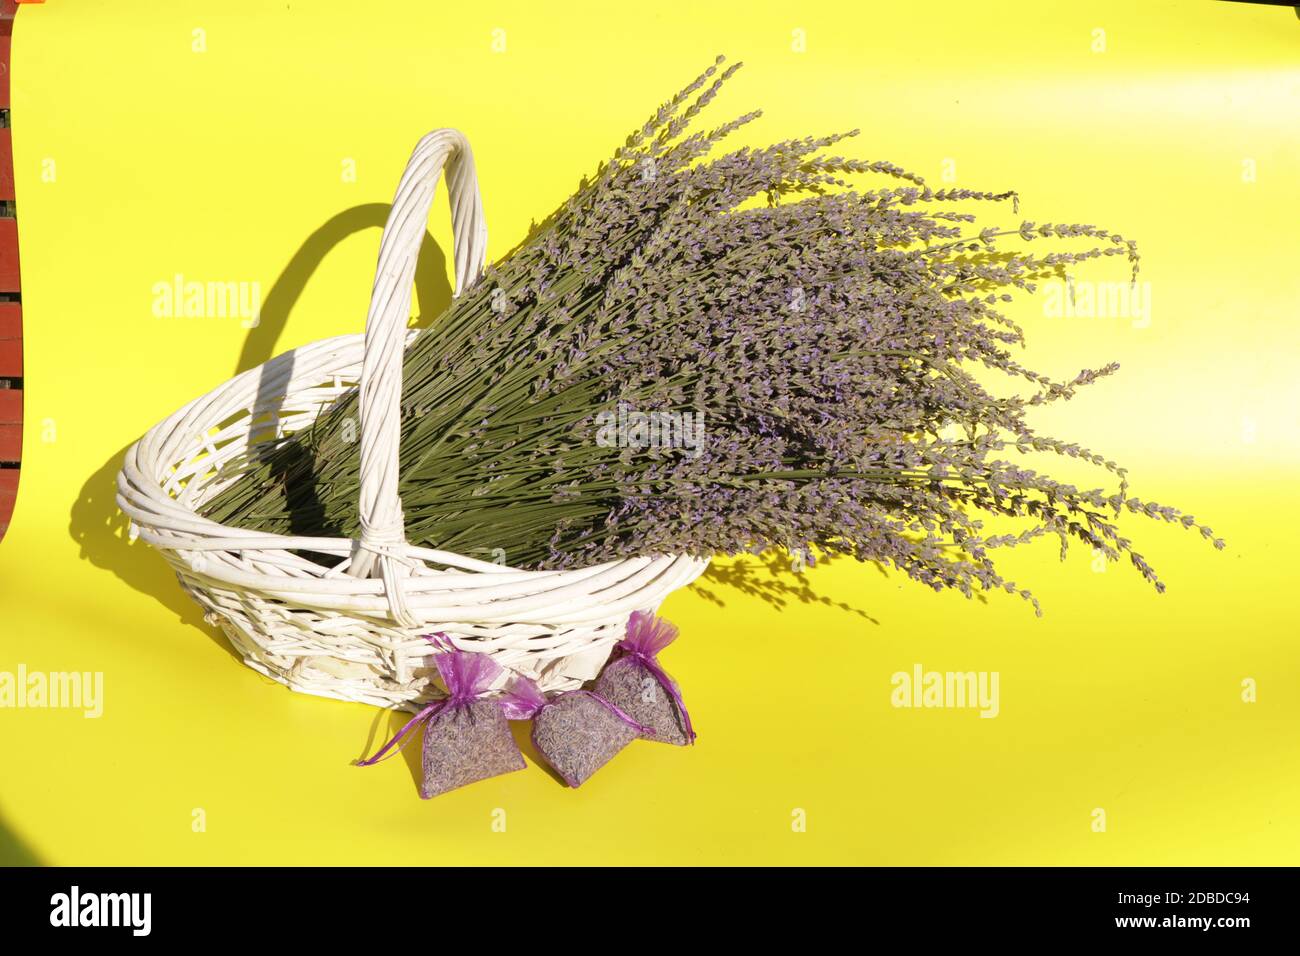 A cut grosso lavender in a white basket on a yellow background Stock Photo